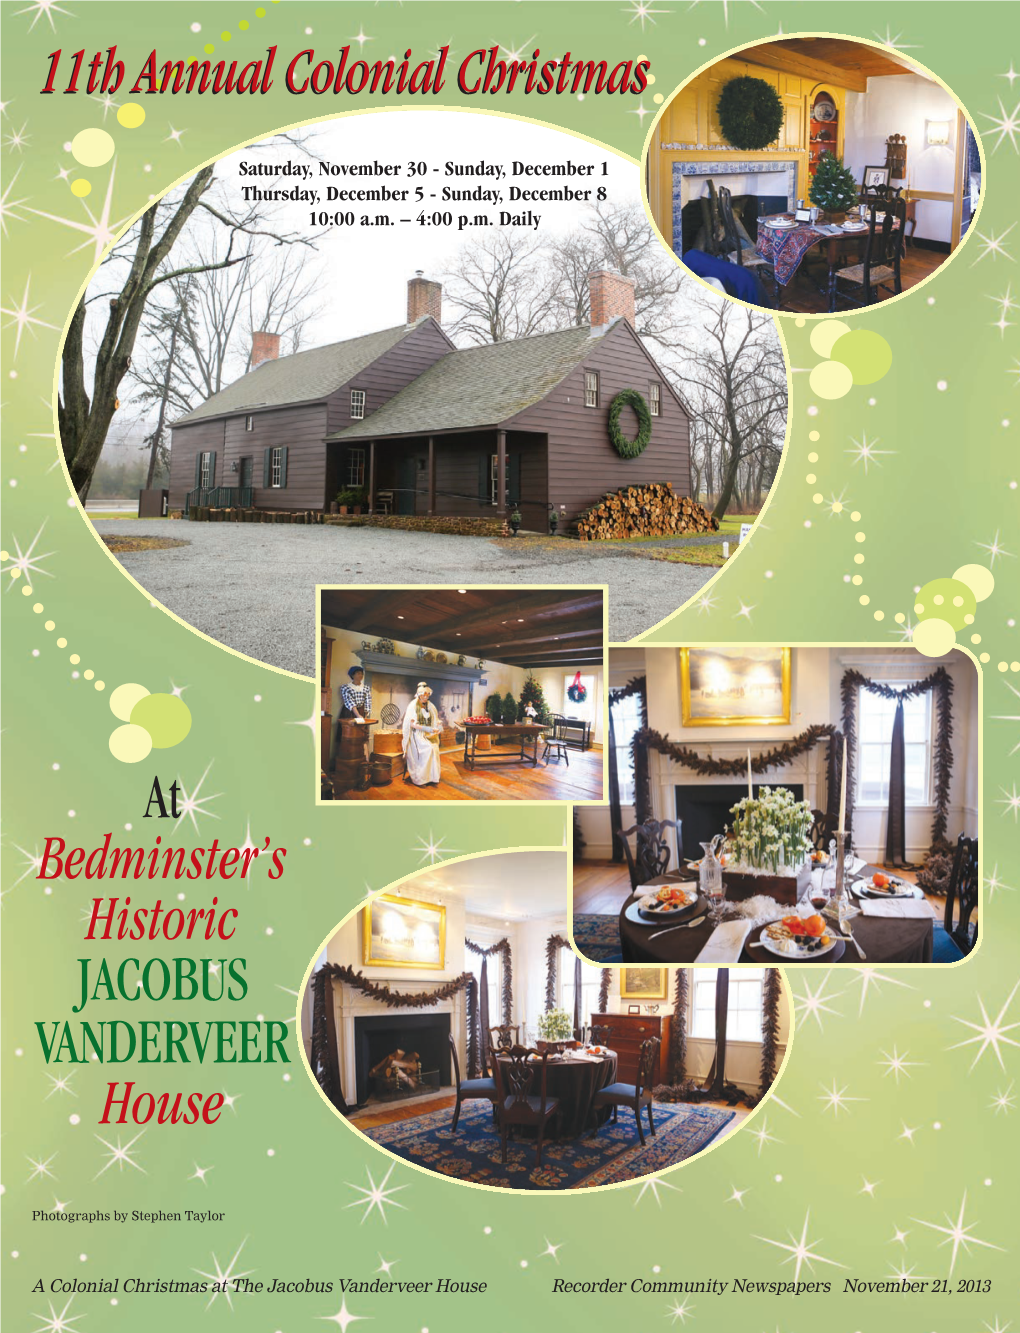 At Bedminster's Historic JACOBUS VANDERVEER House 11Th Annual